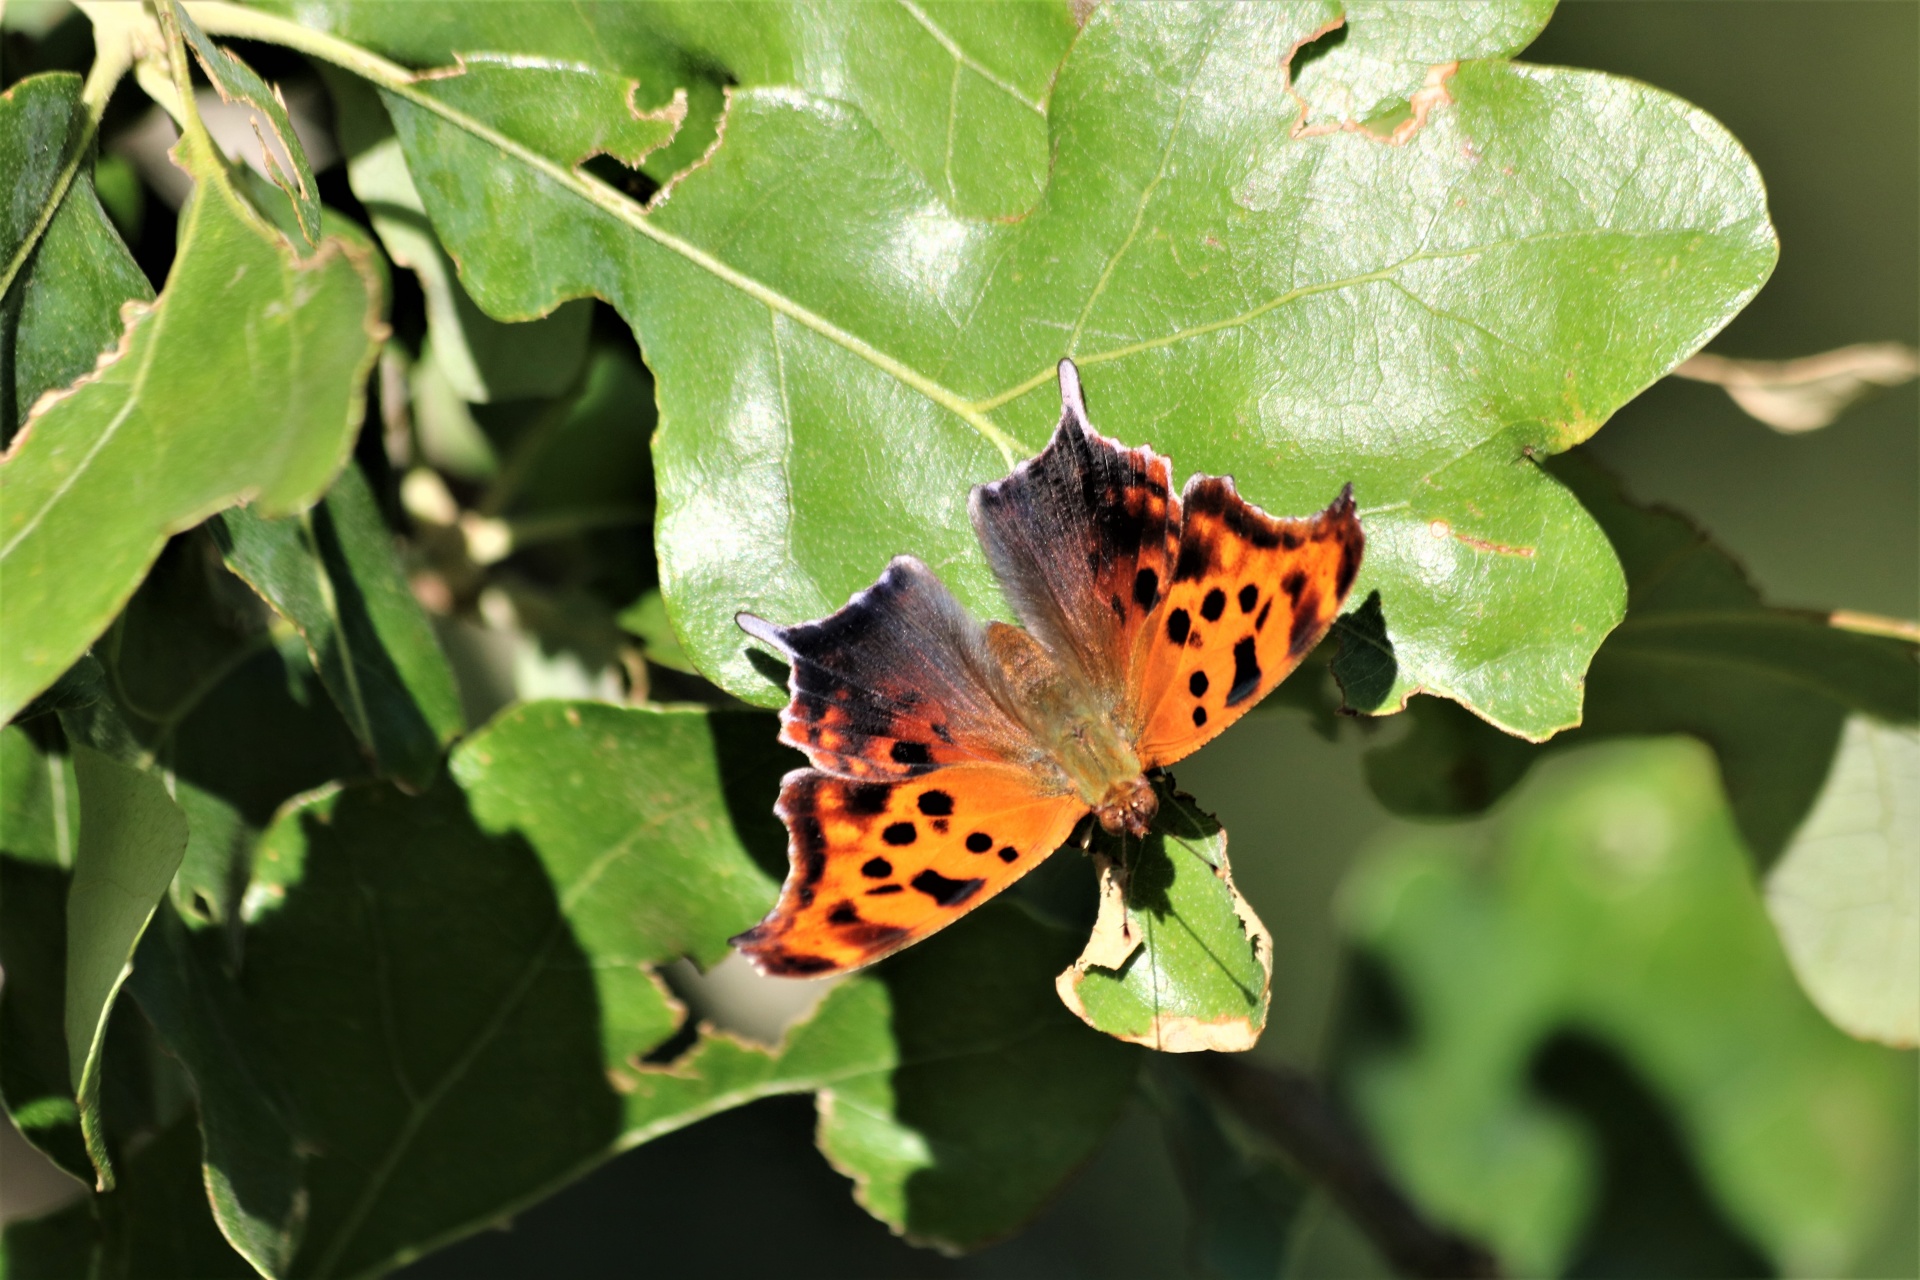 Close-up of a beautiful orange and black question mark butterfly, with wings spread open, siting on a bright green oak leaf with a blurred green background.